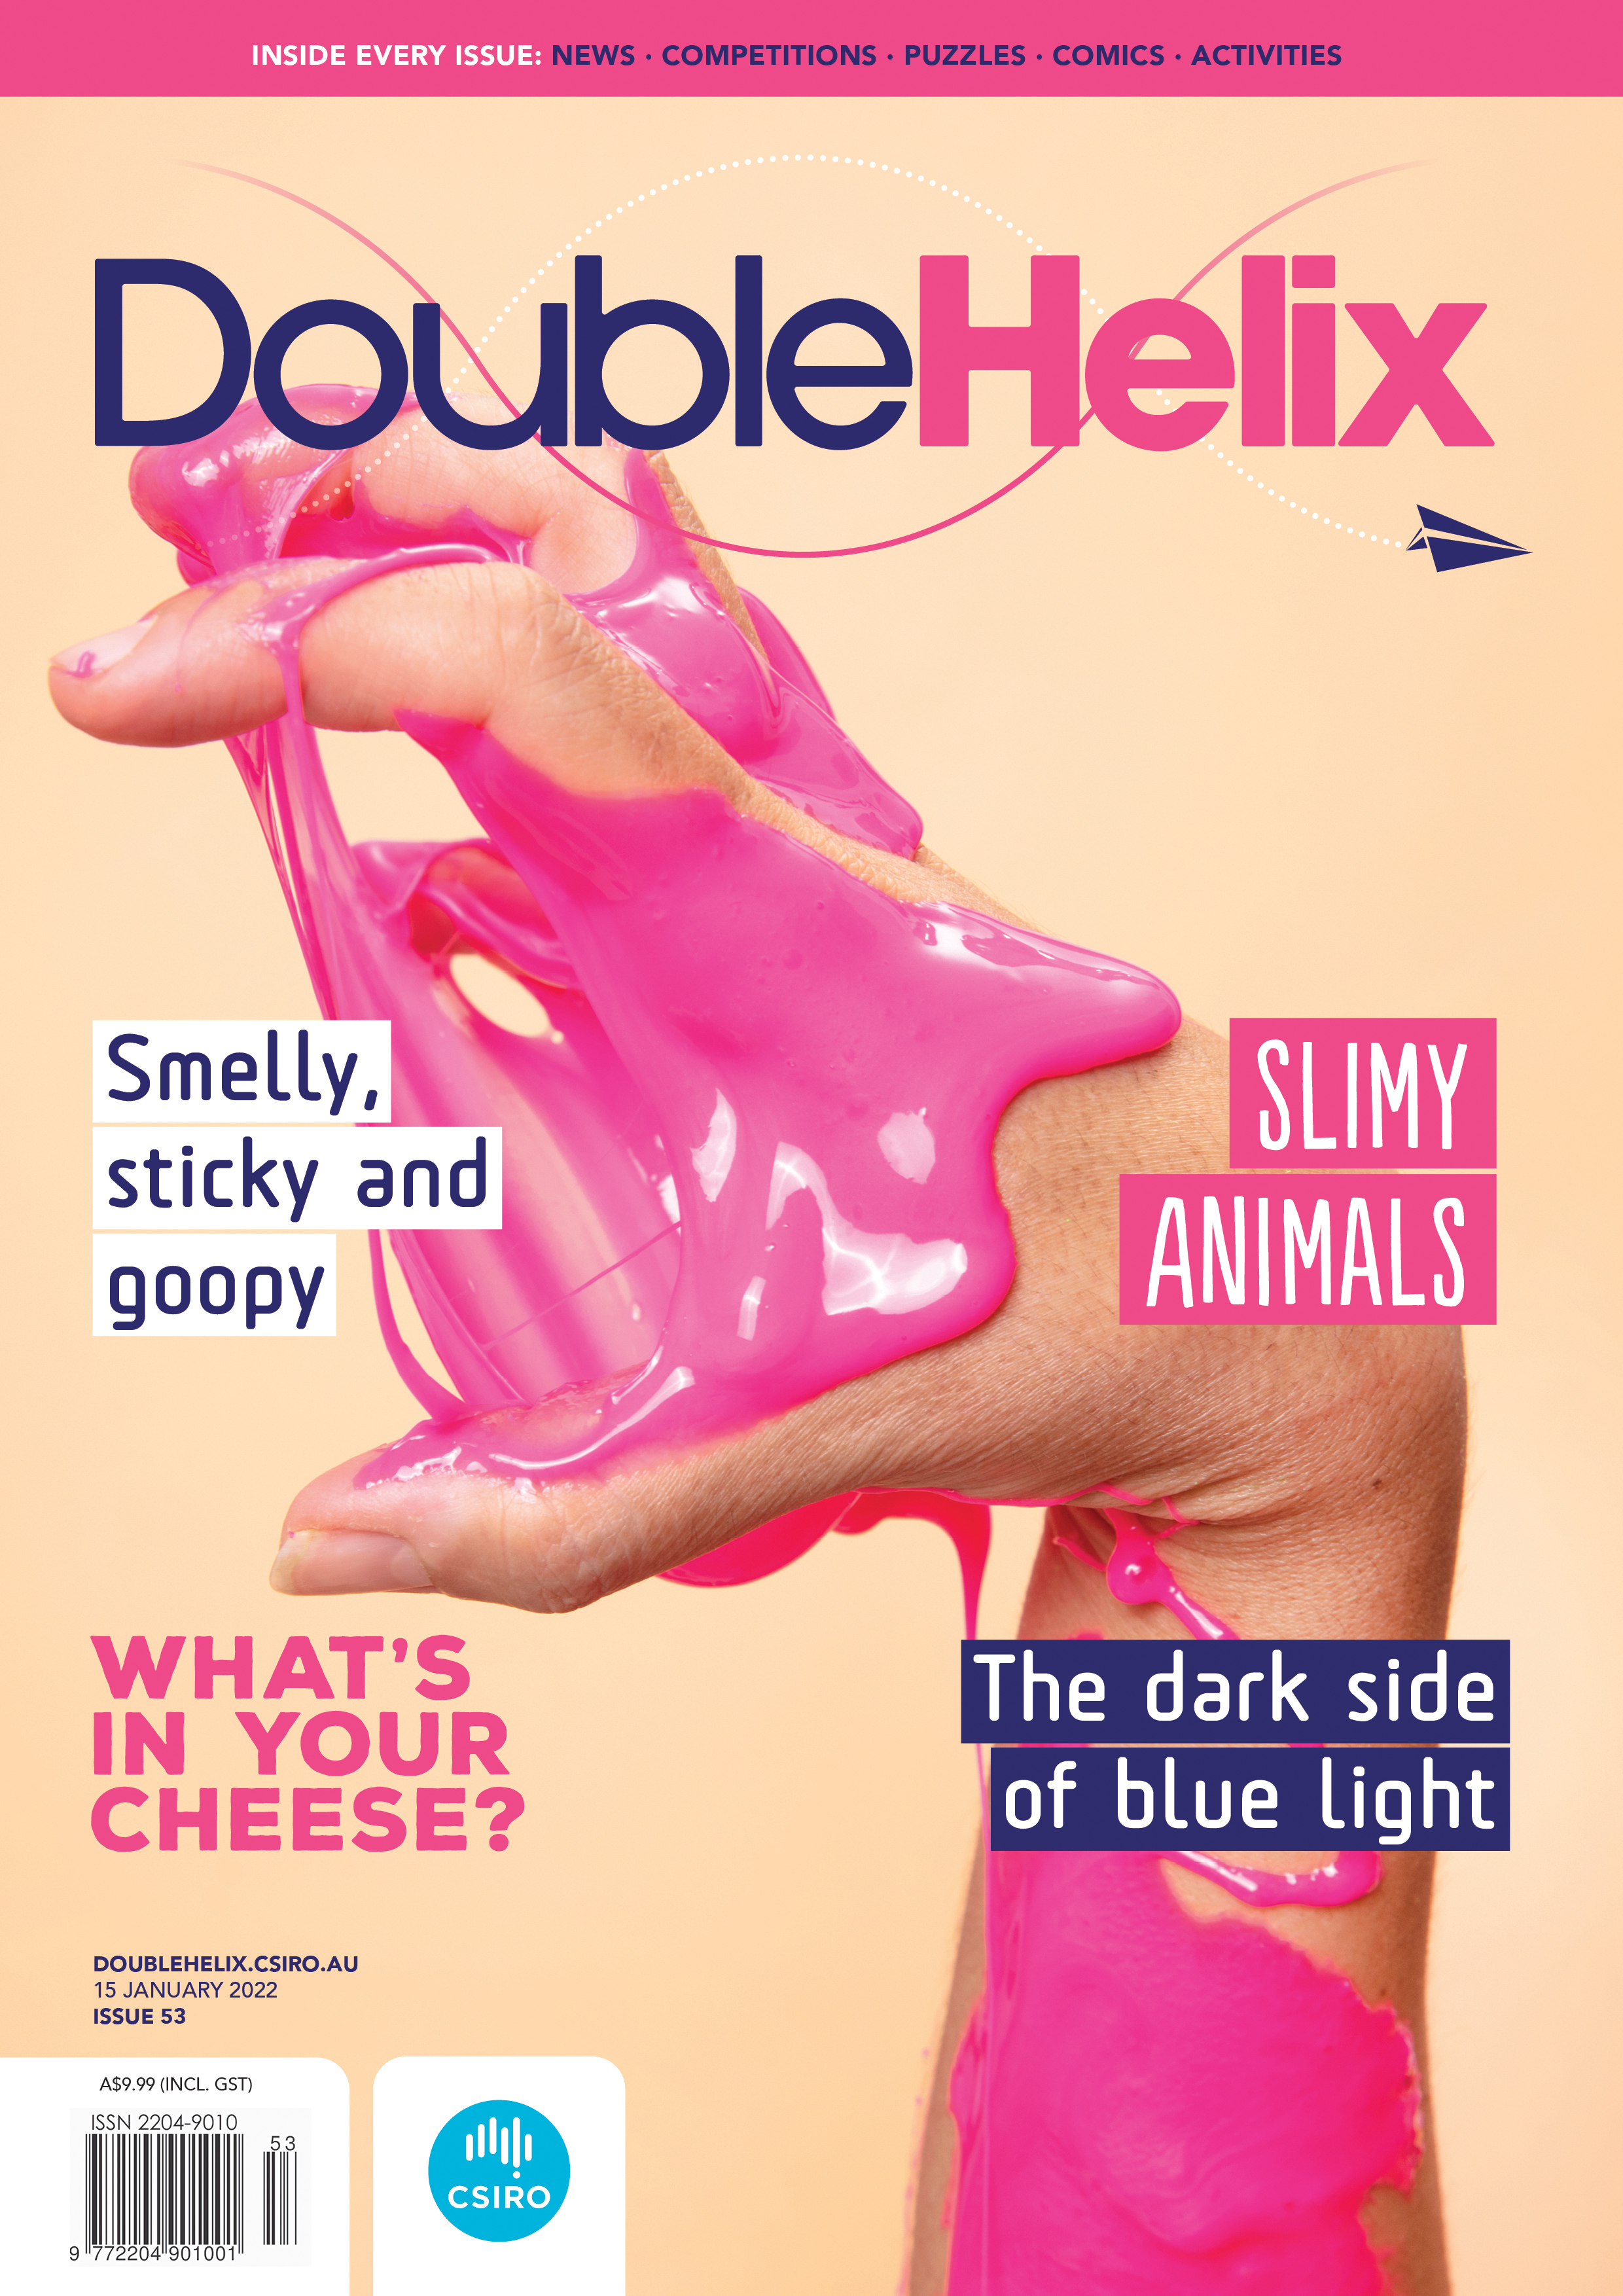 Cover of 'Double Helix' magazine issue 53, featuring a photograph of someone's hand covered in bright pink gooey slime.